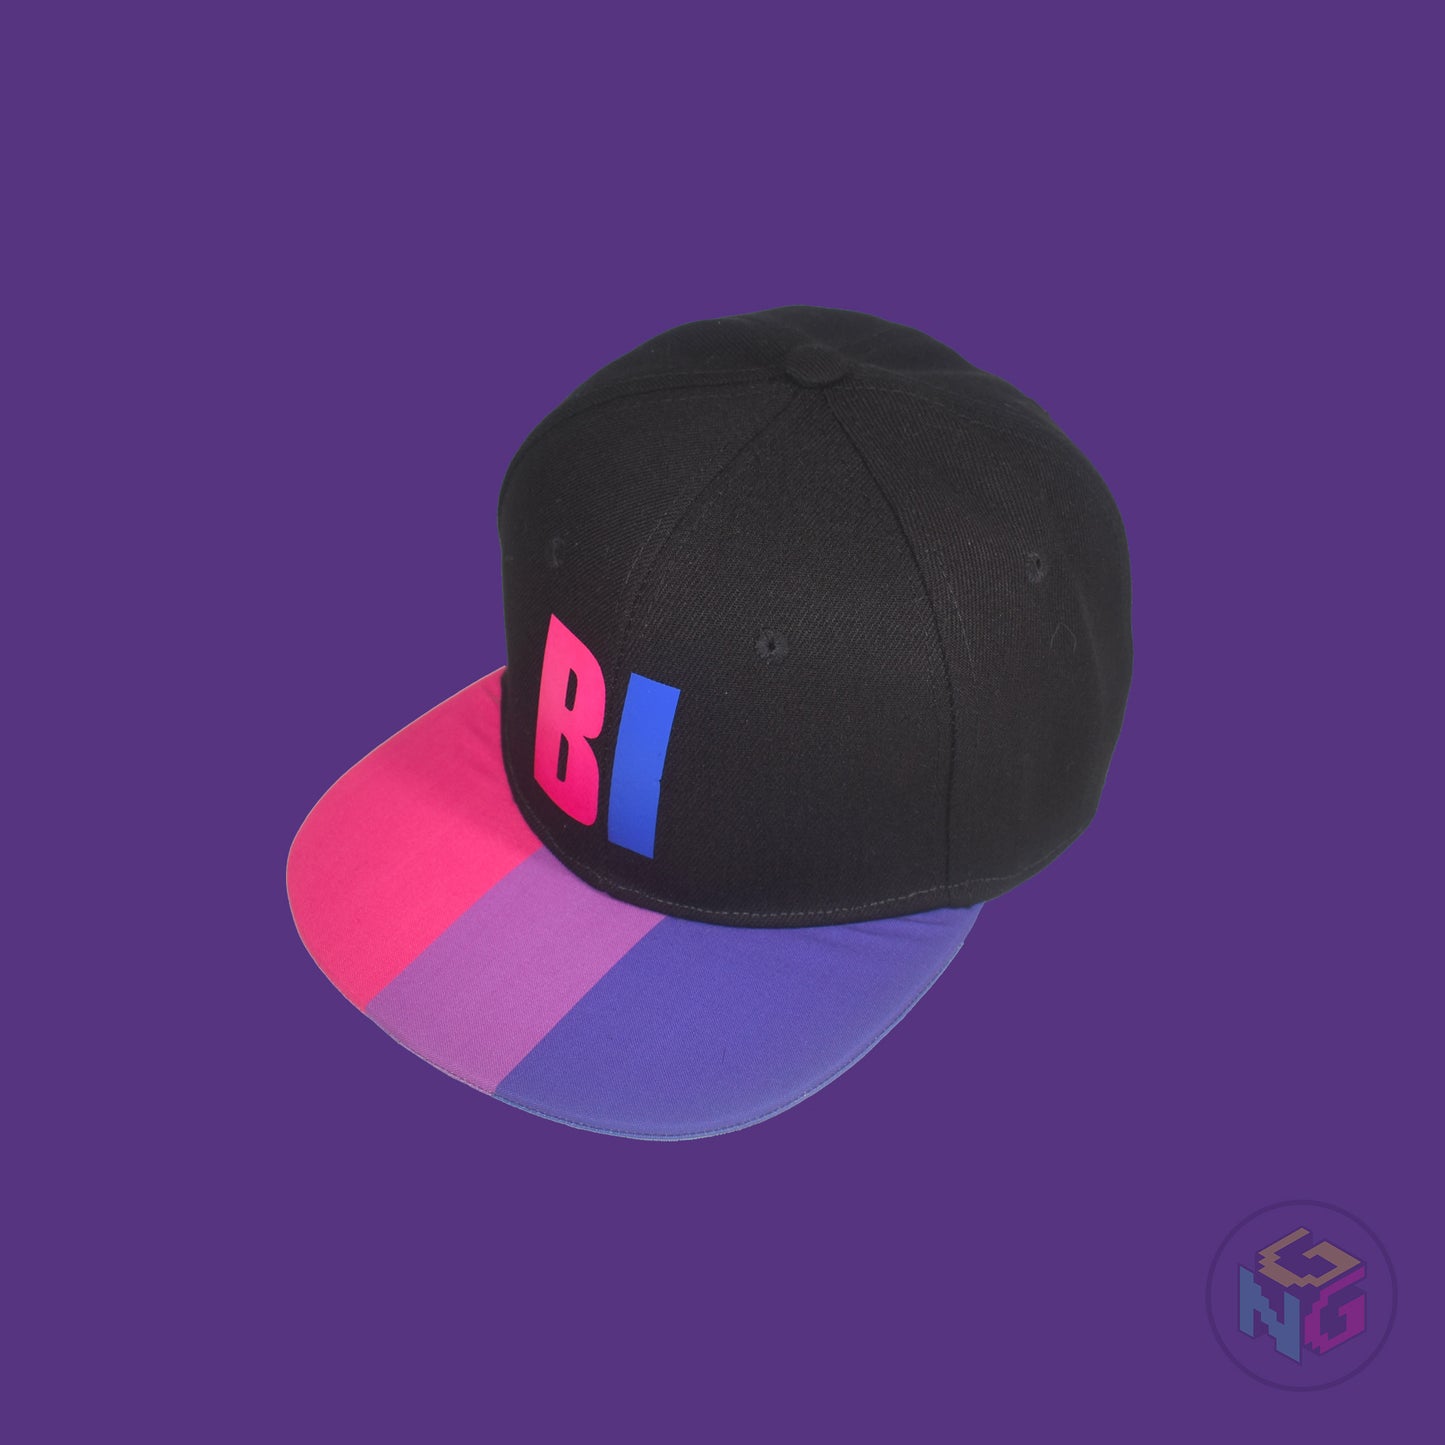 Black flat bill snapback hat. The brim has the bisexual pride flag on both sides and the front of the hat has the word “BI” in pink and blue. Front left view